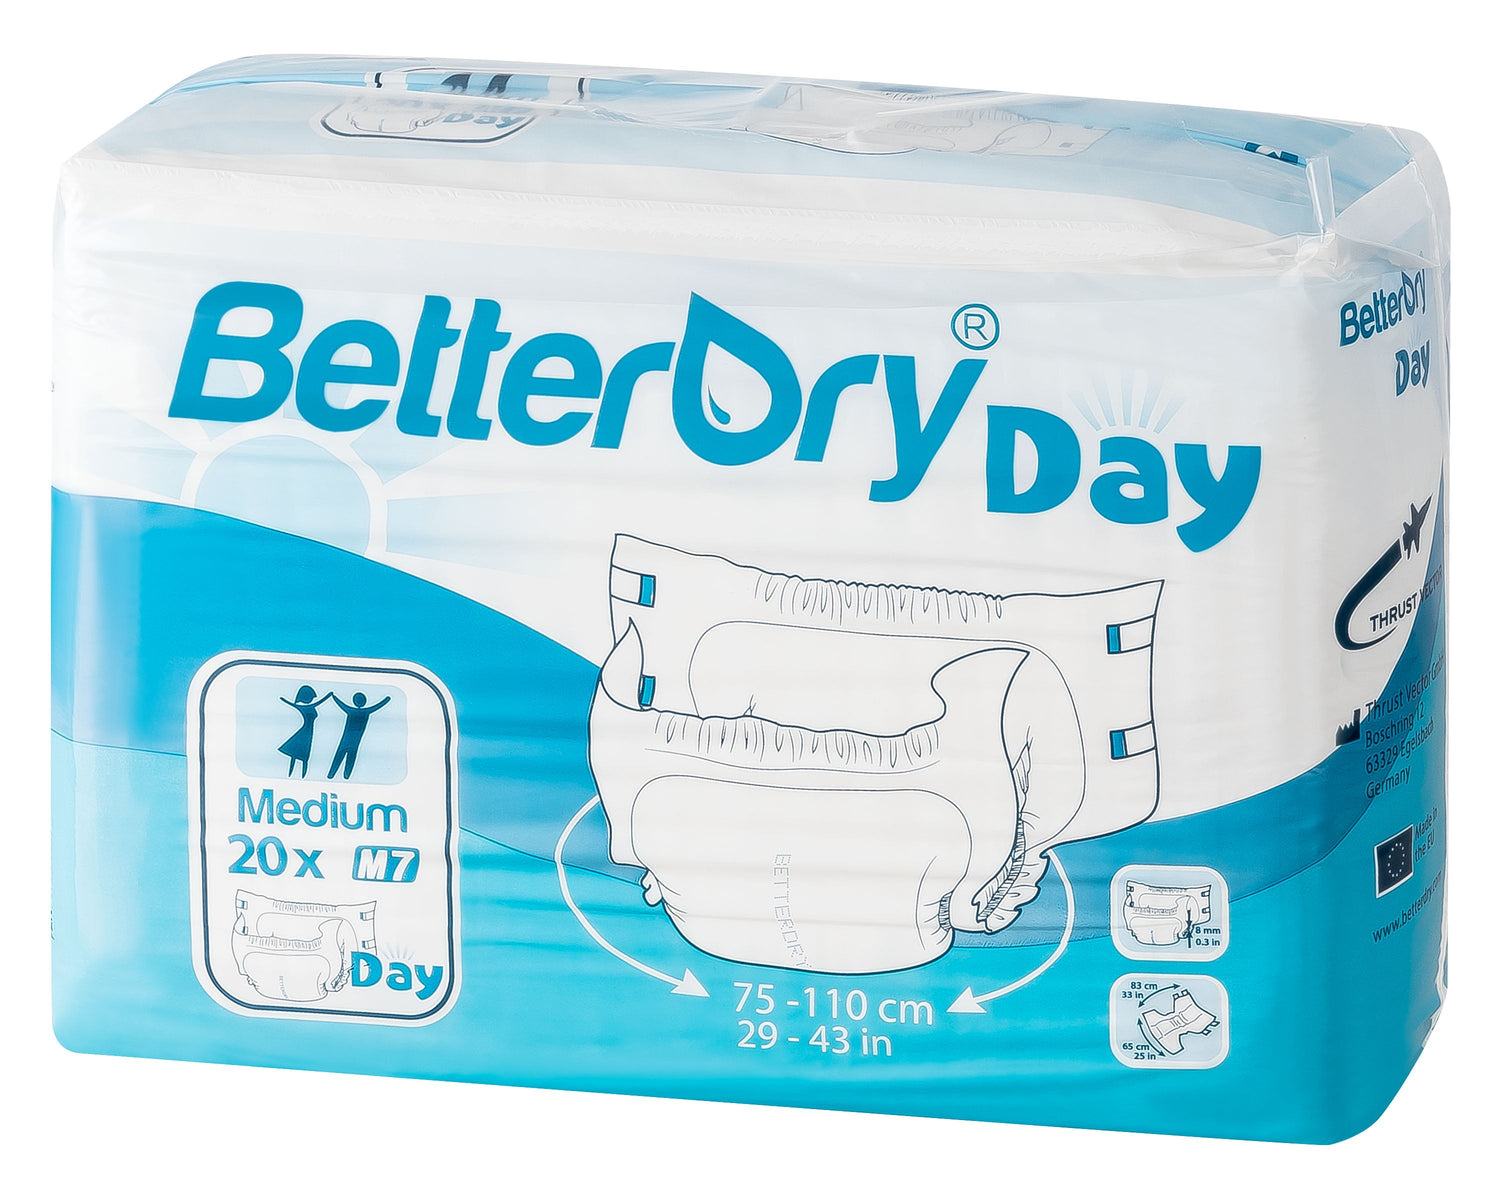 BetterDry 7 DAY - Adult Diapers